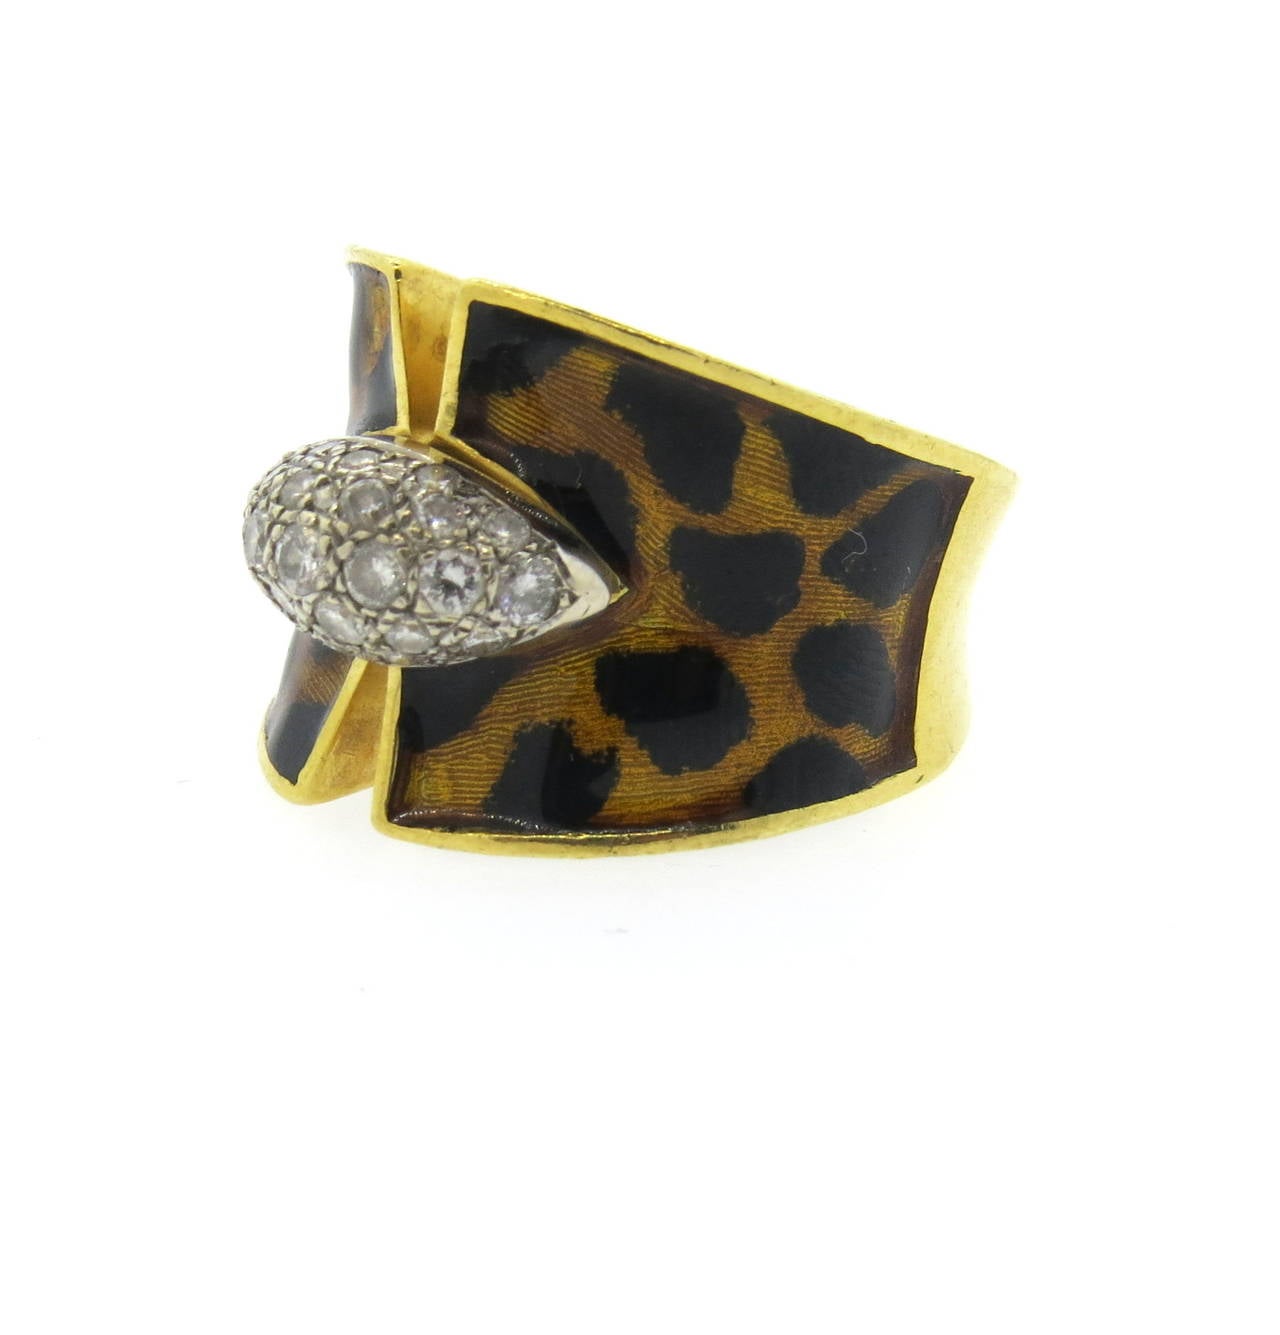 Unusual 18k gold ring, featuring approximately 0.30ctw in H/VS diamonds in the center, decorated with cheetah print enamel. Ring size 7, ring top is 19mm wide. Weight of the piece - 17.2 grams